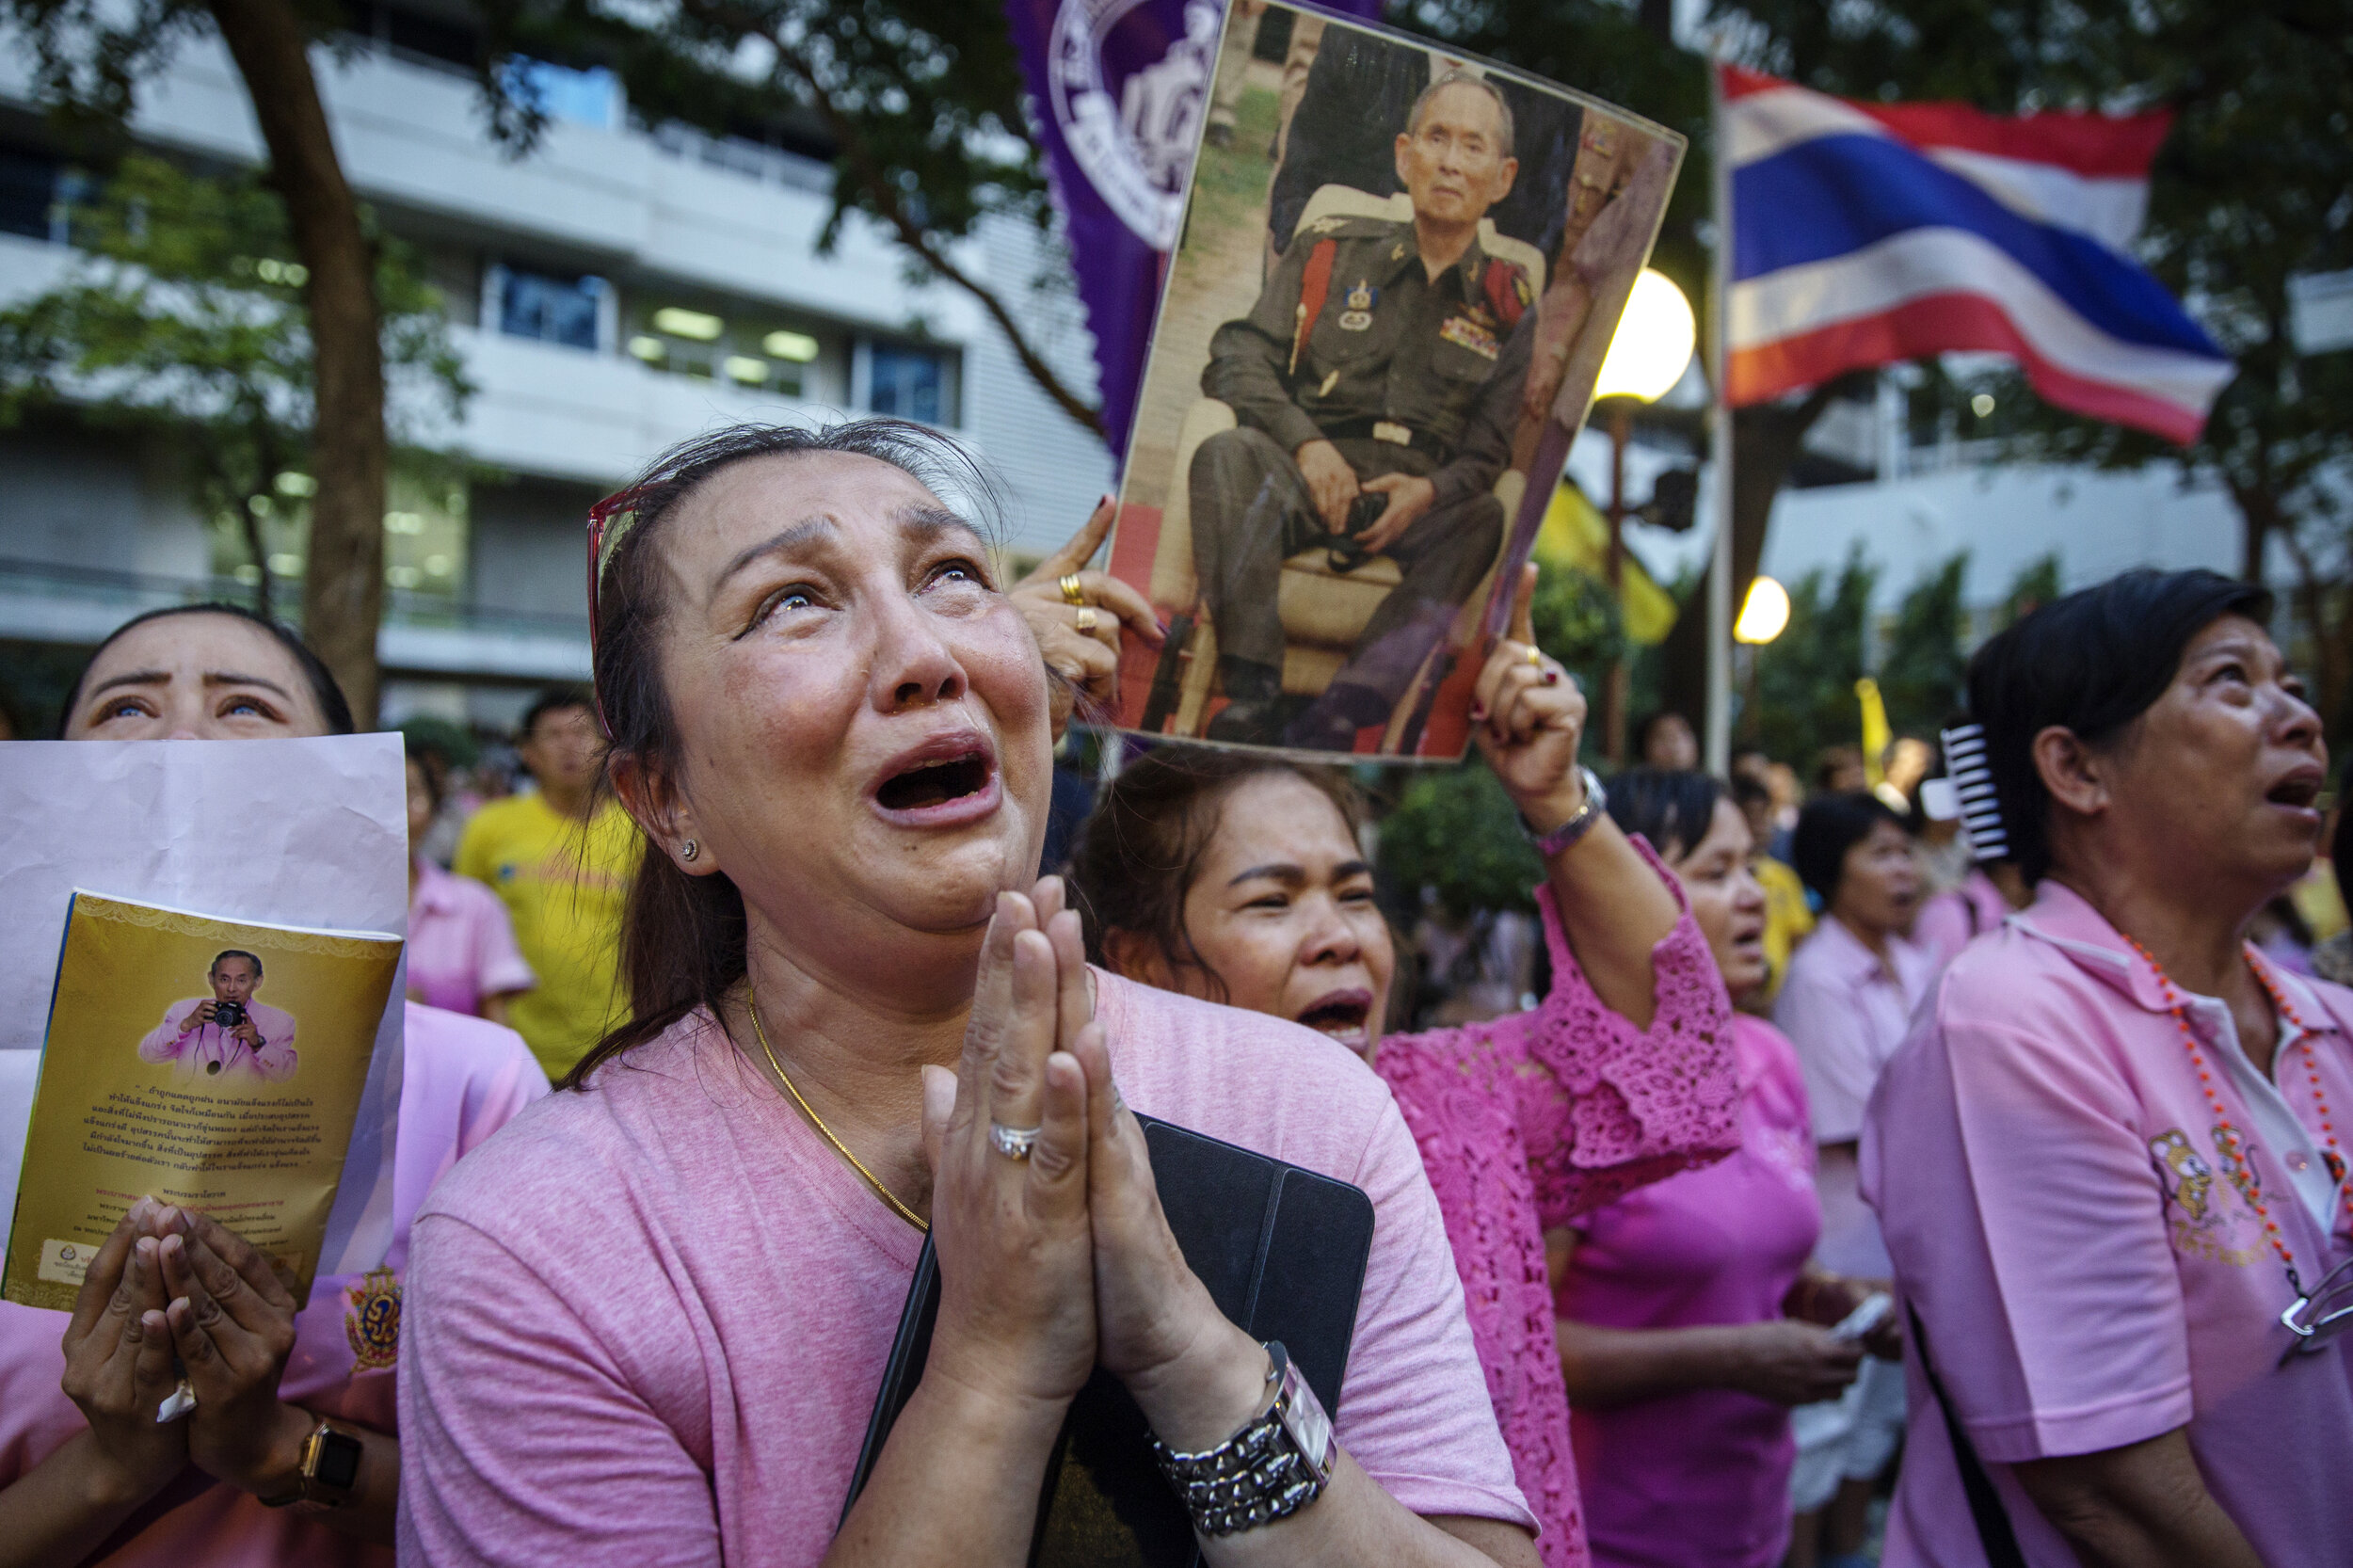  Subjects mourn outside the hospital when the announcement that Thailand's former king, Bhumibol Adulyadej, passed away on October 13, 2016, Bangkok / Thailand. 